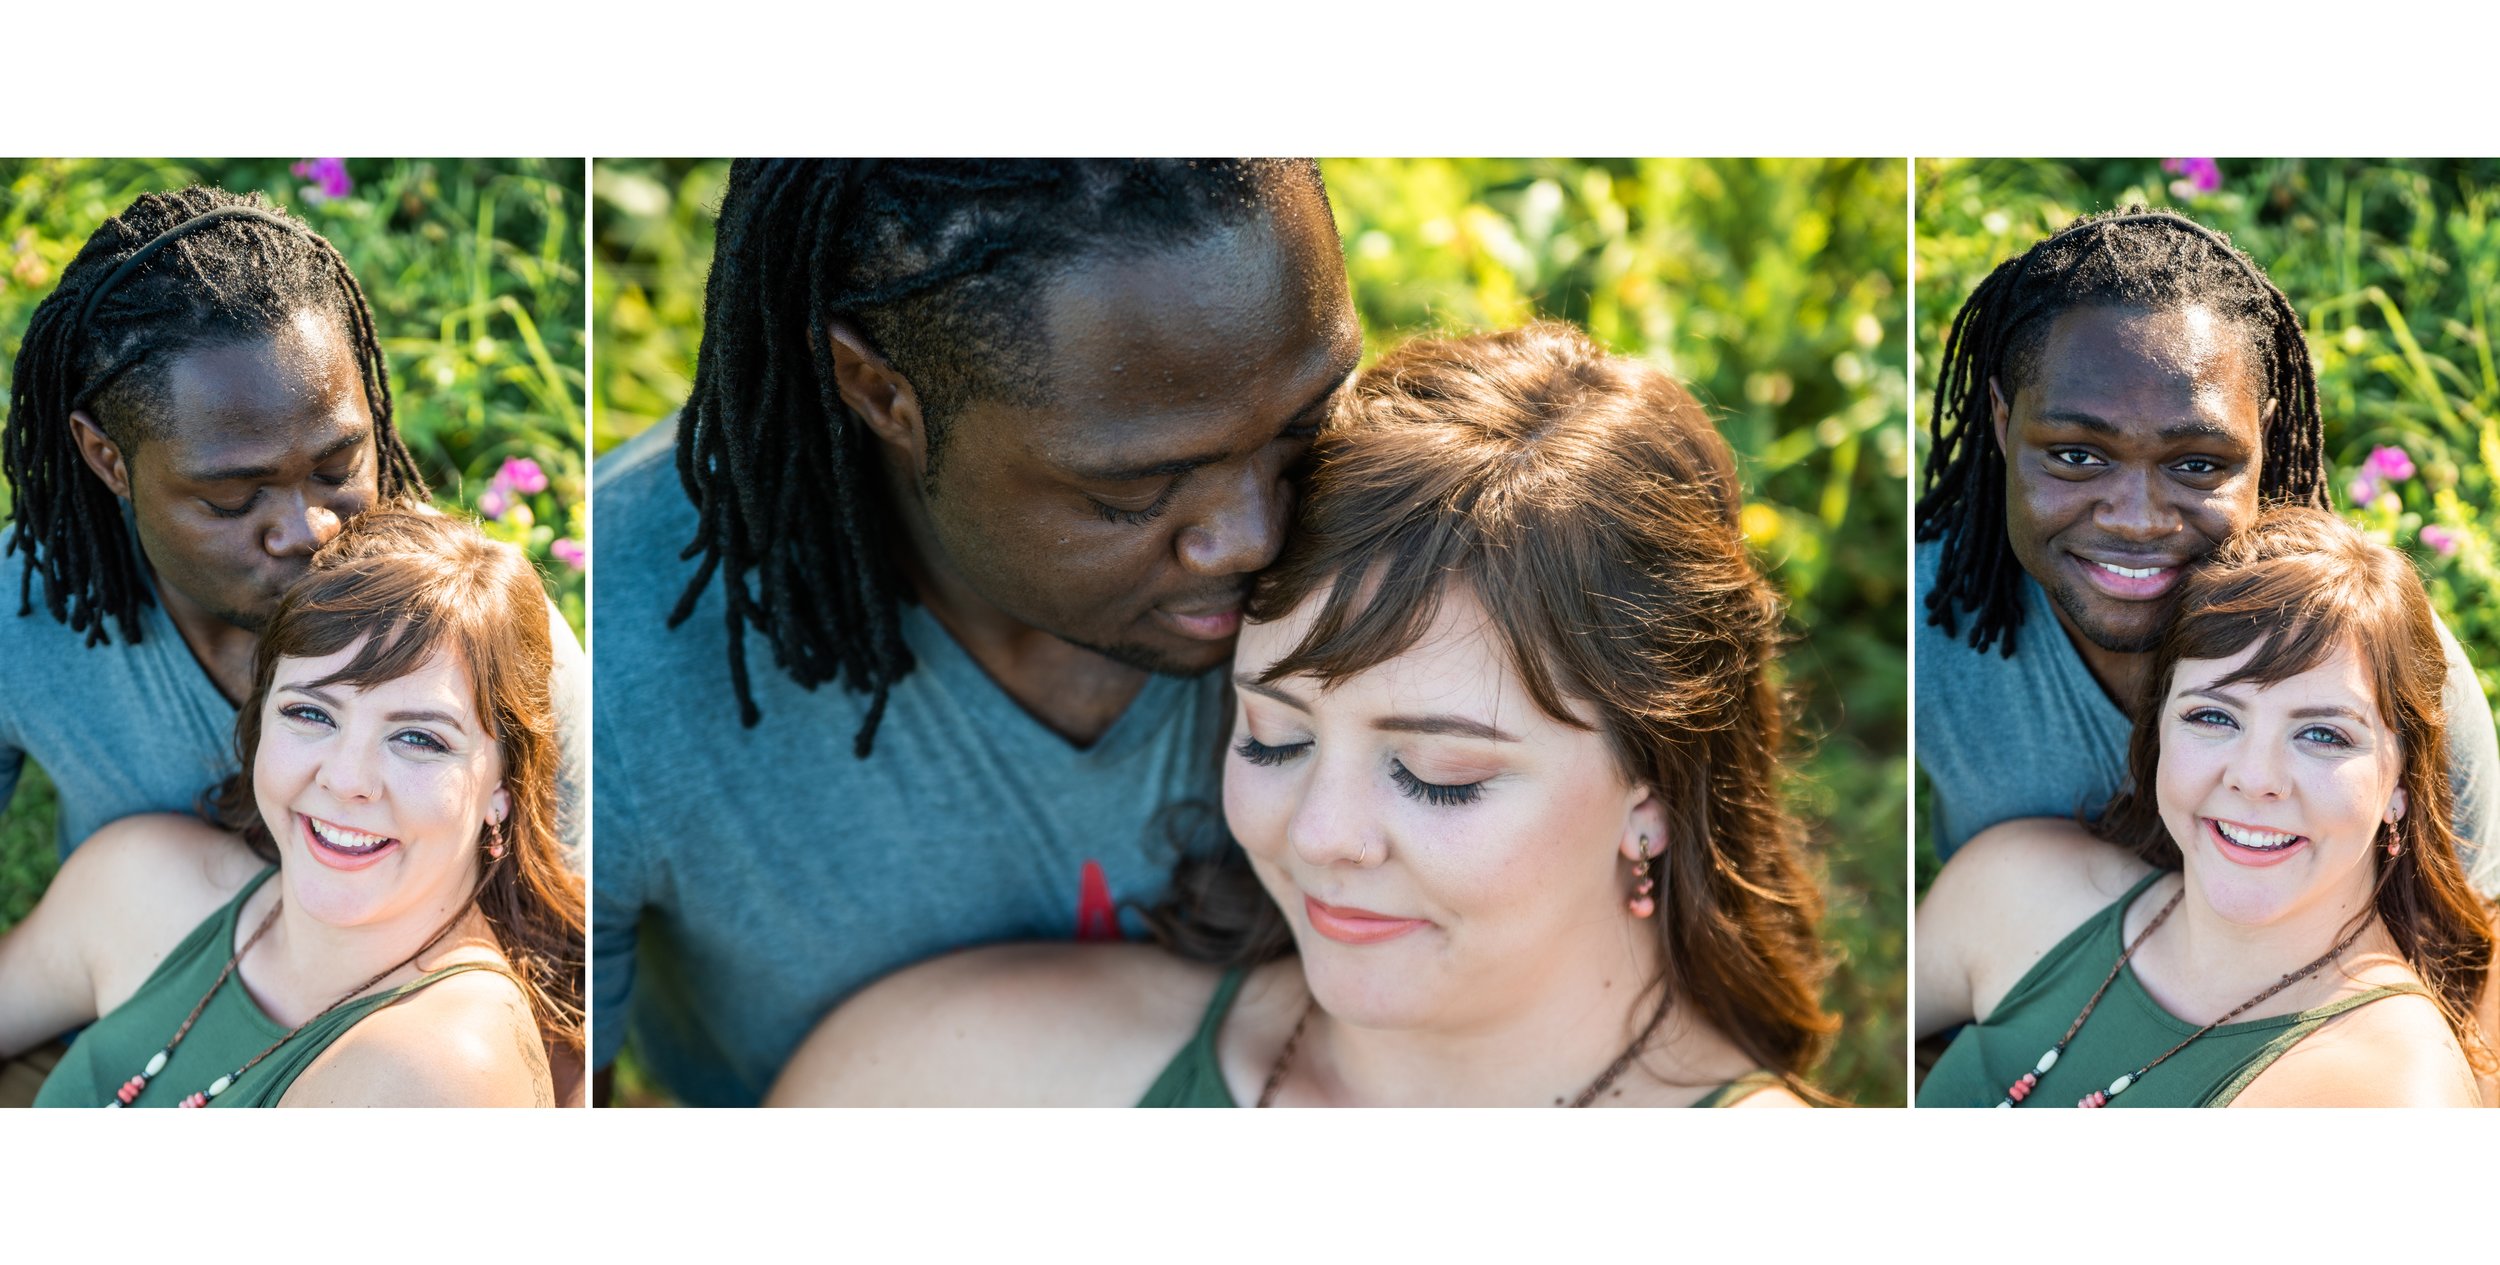 Brewery Engagement Photo Album in Asheville, NC